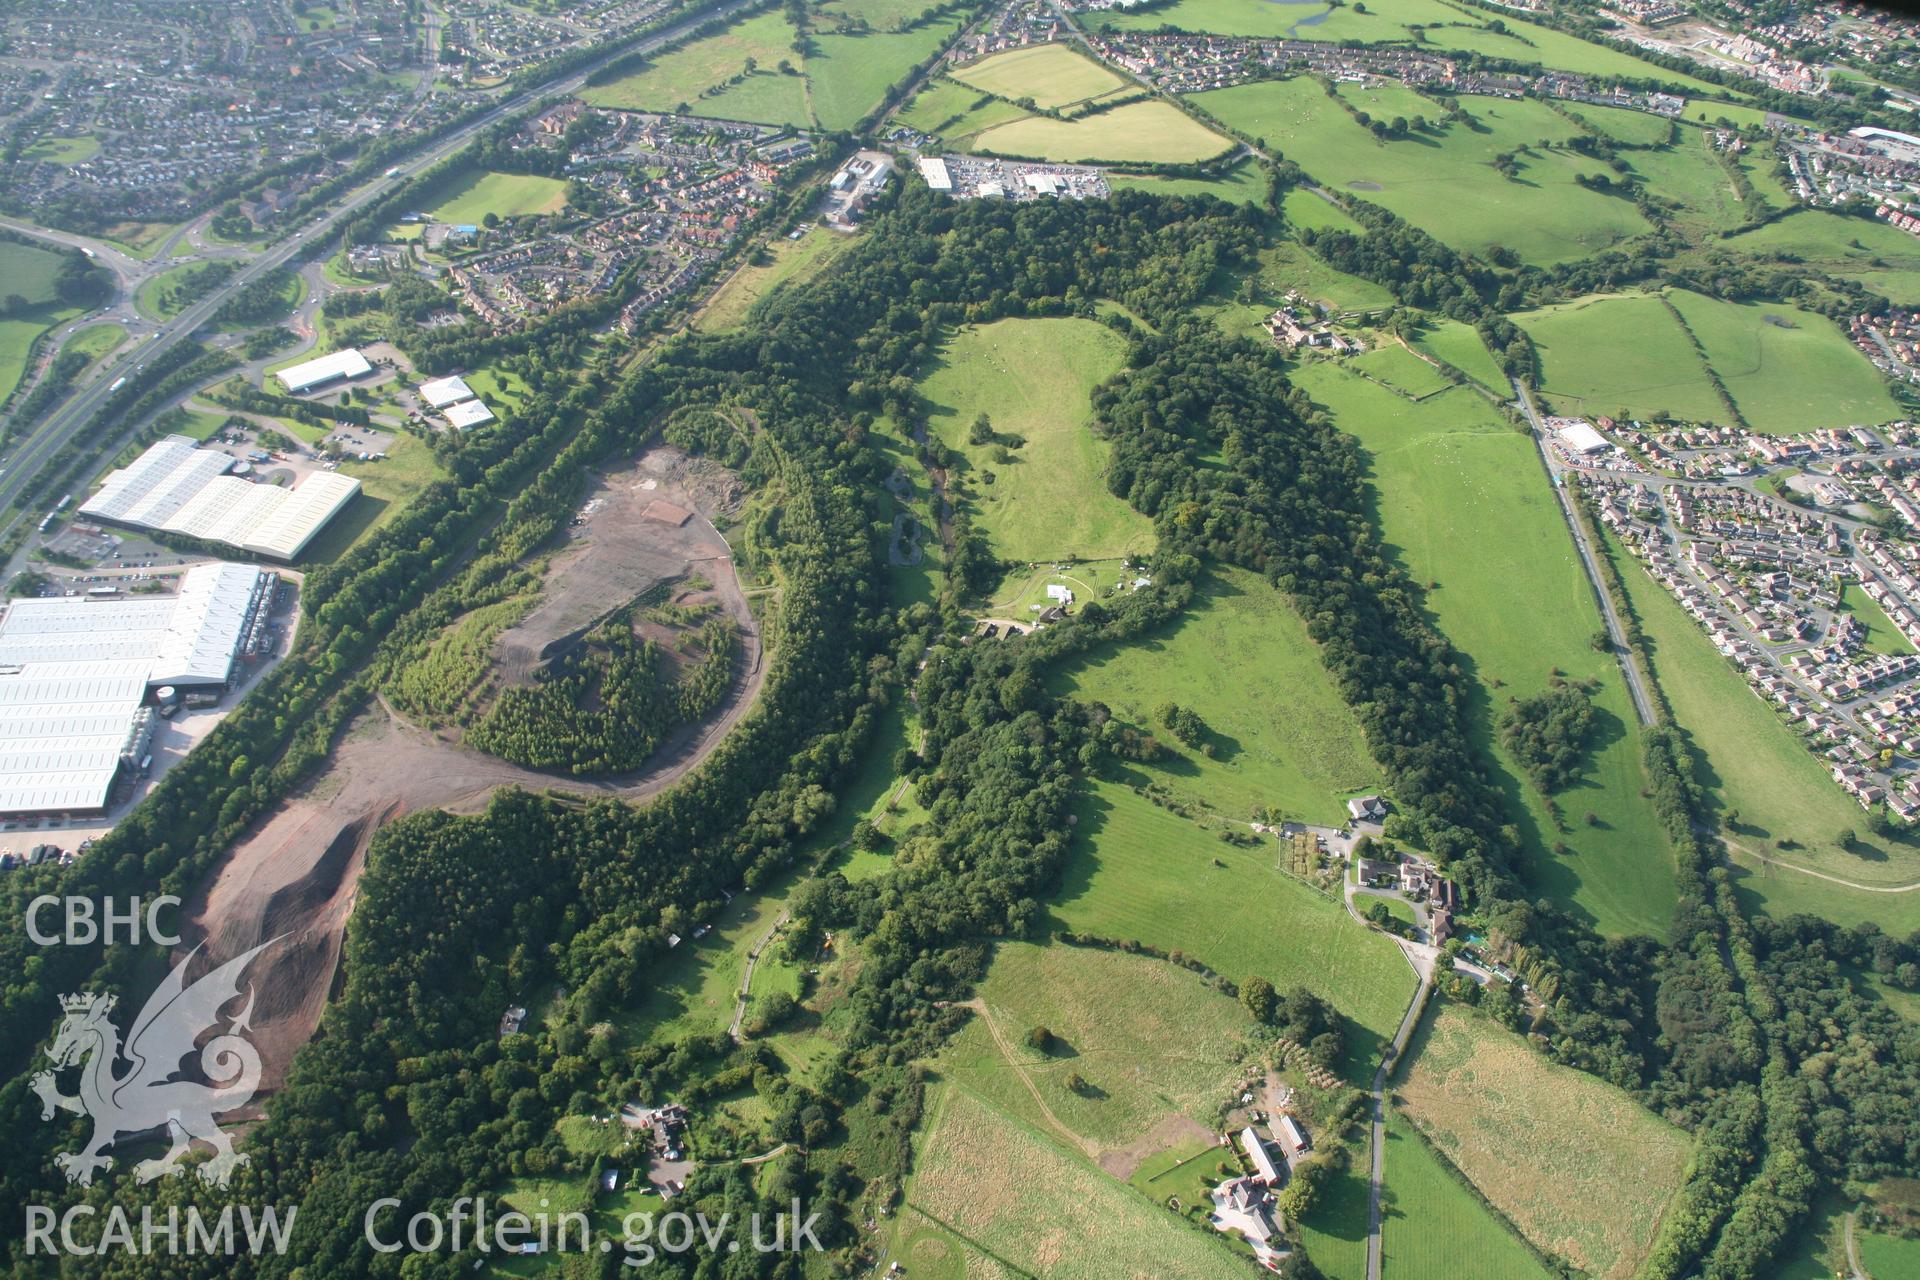 Digital colour photograph showing Bryn Alyn Hillfort and the surrounding area.